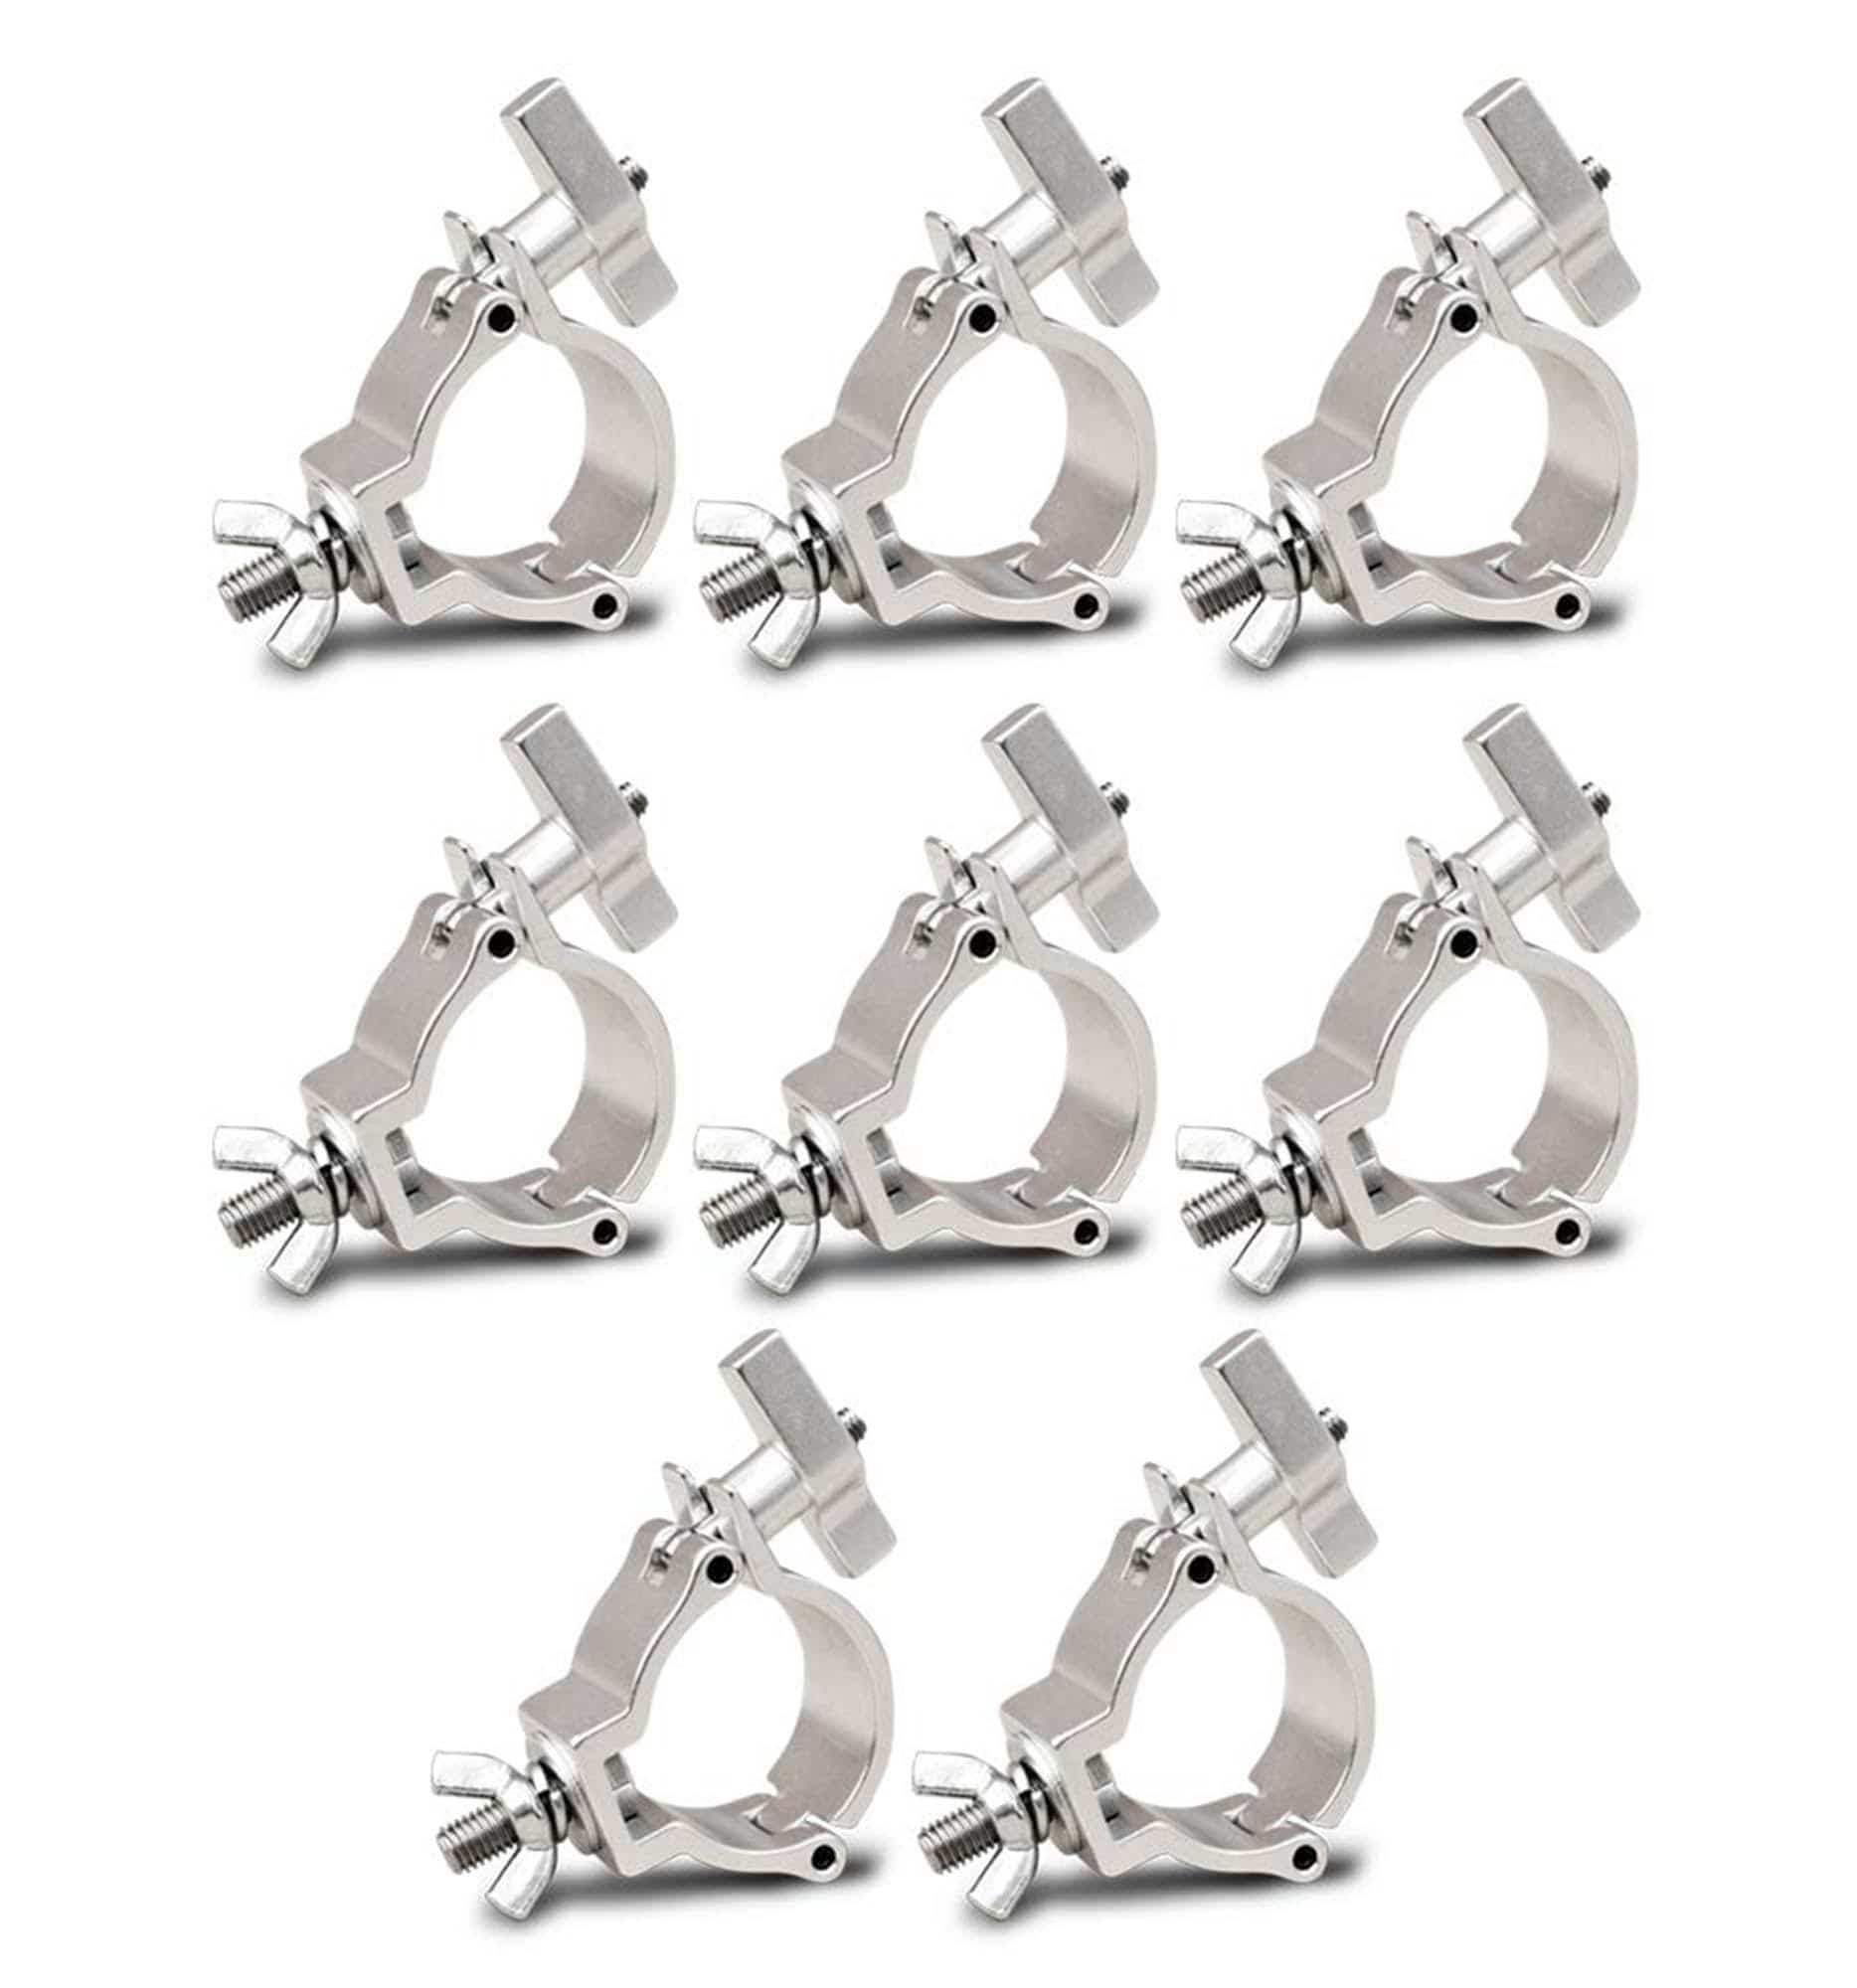 GALAXY 2" inch Silver Aluminum Clamp for Lighting (8 Pack) - Hollywood DJ